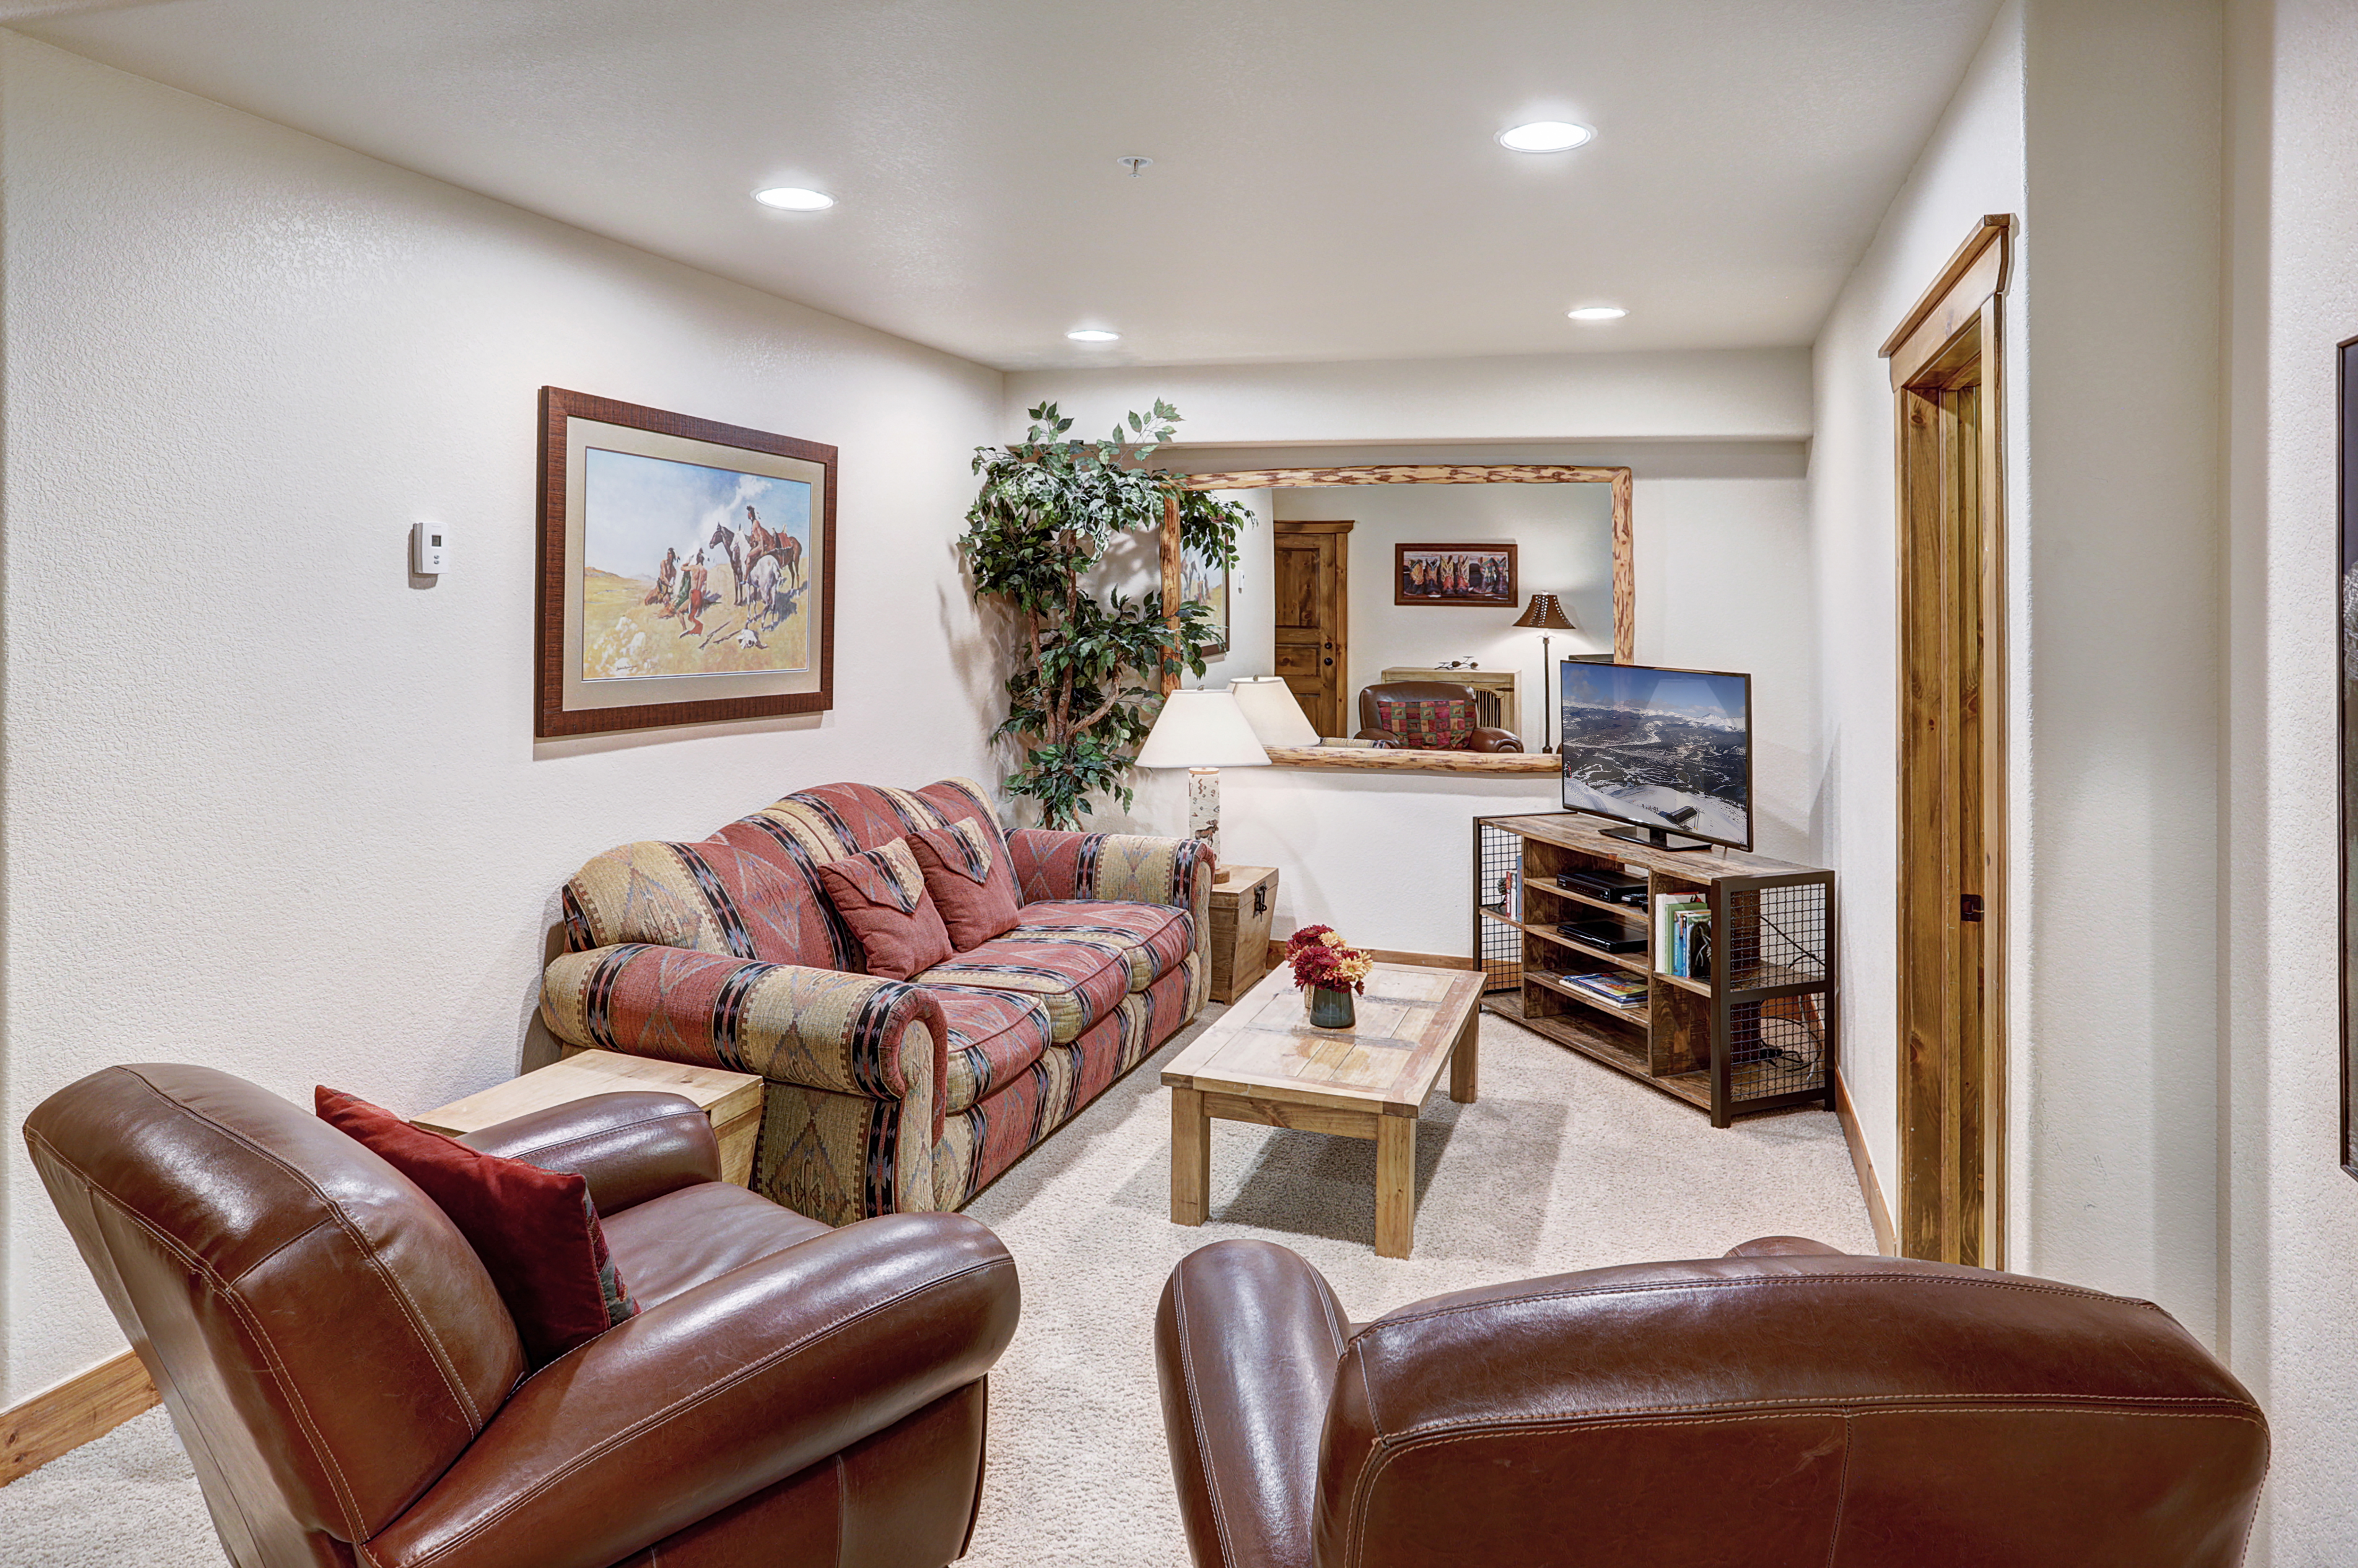 Lower level living area with a pullout couch for extra sleeping arrangements - Amber Sky Breckenridge Vacation Rental